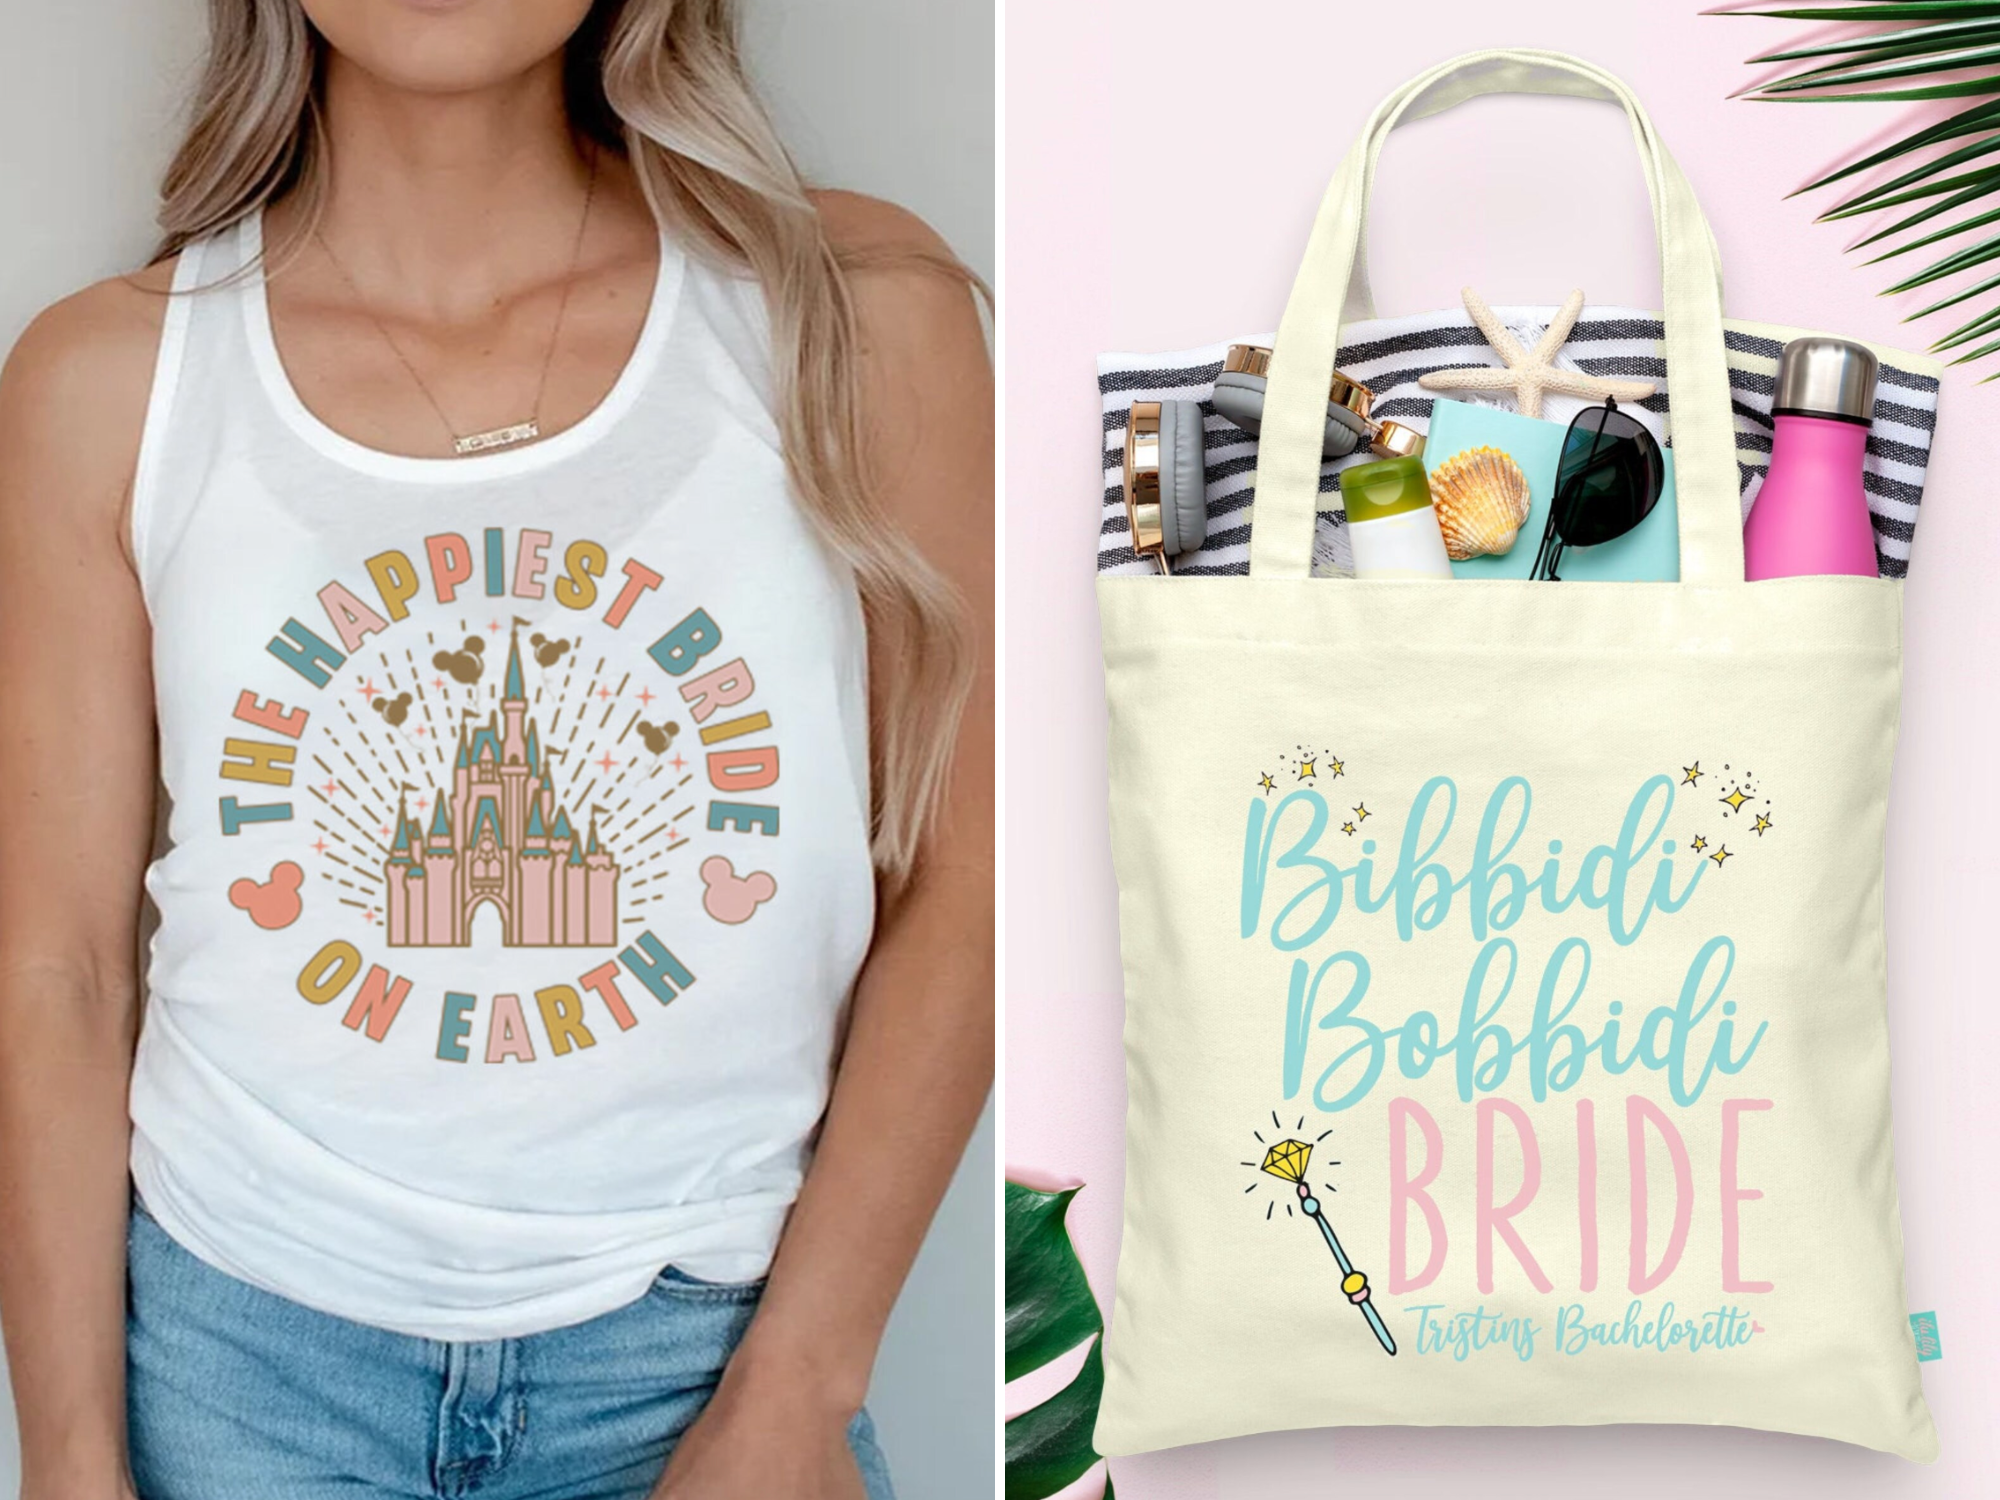 Disney bachelorette party supplies including tank top and tote bag